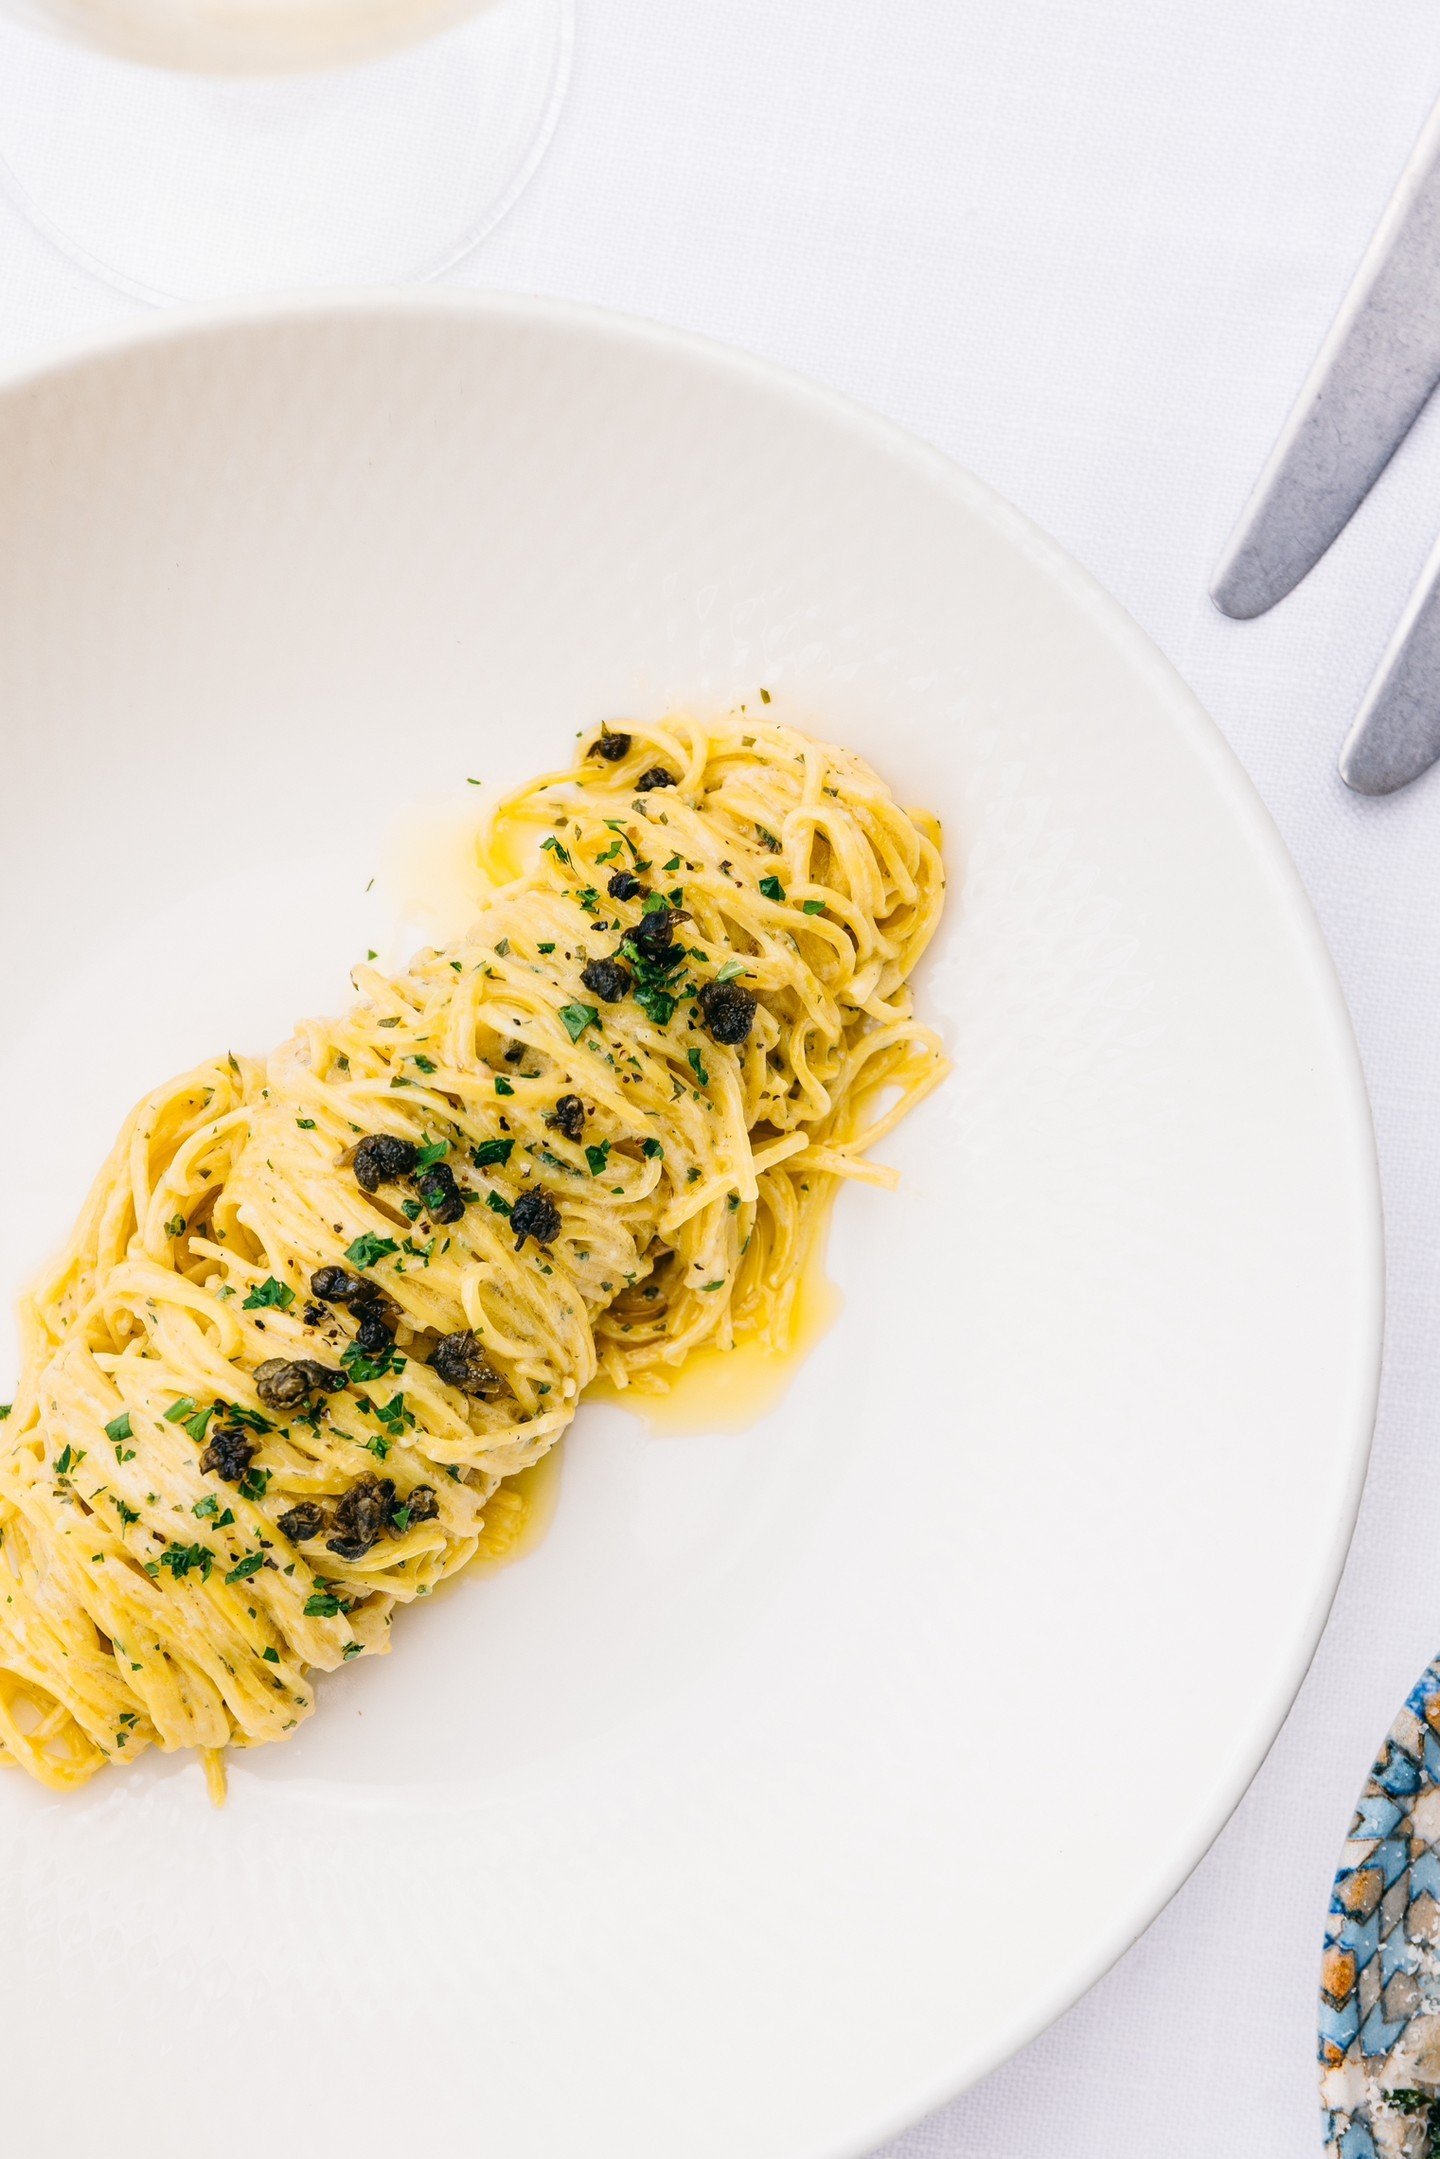 Saturdays with our NQ Tropical Painted Lobster, Angel Hair Pasta ~ Lemon, Garlic &amp; Thyme

#yourfirstresort

Call (07) 3071 9142 or book online at www.tillerman.com.au/ book-now.
Located 71 Eagle St, Brisbane - On The River.